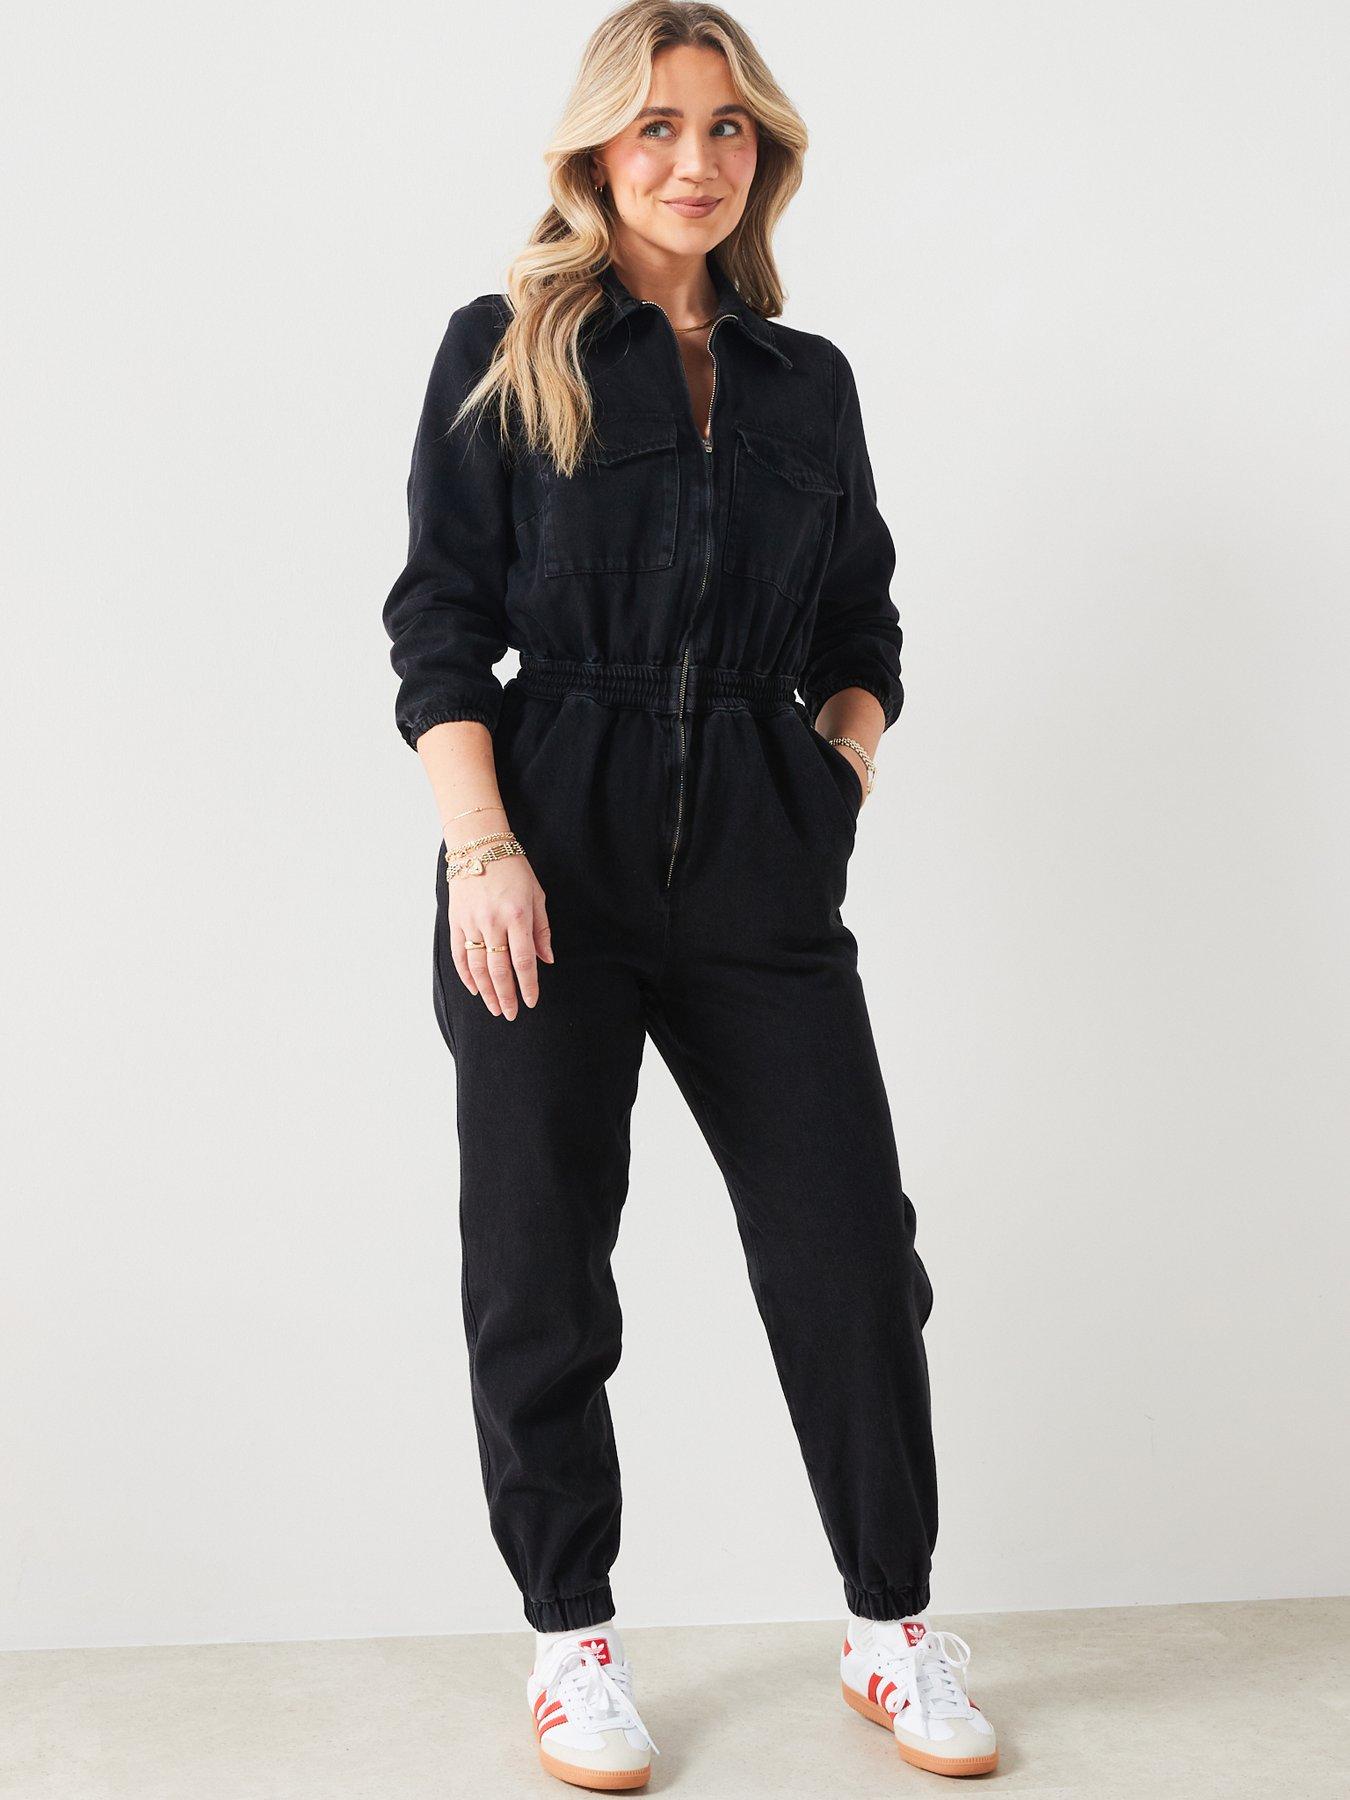 The Different Types of Jumpsuits Available to you | by Mai | Medium